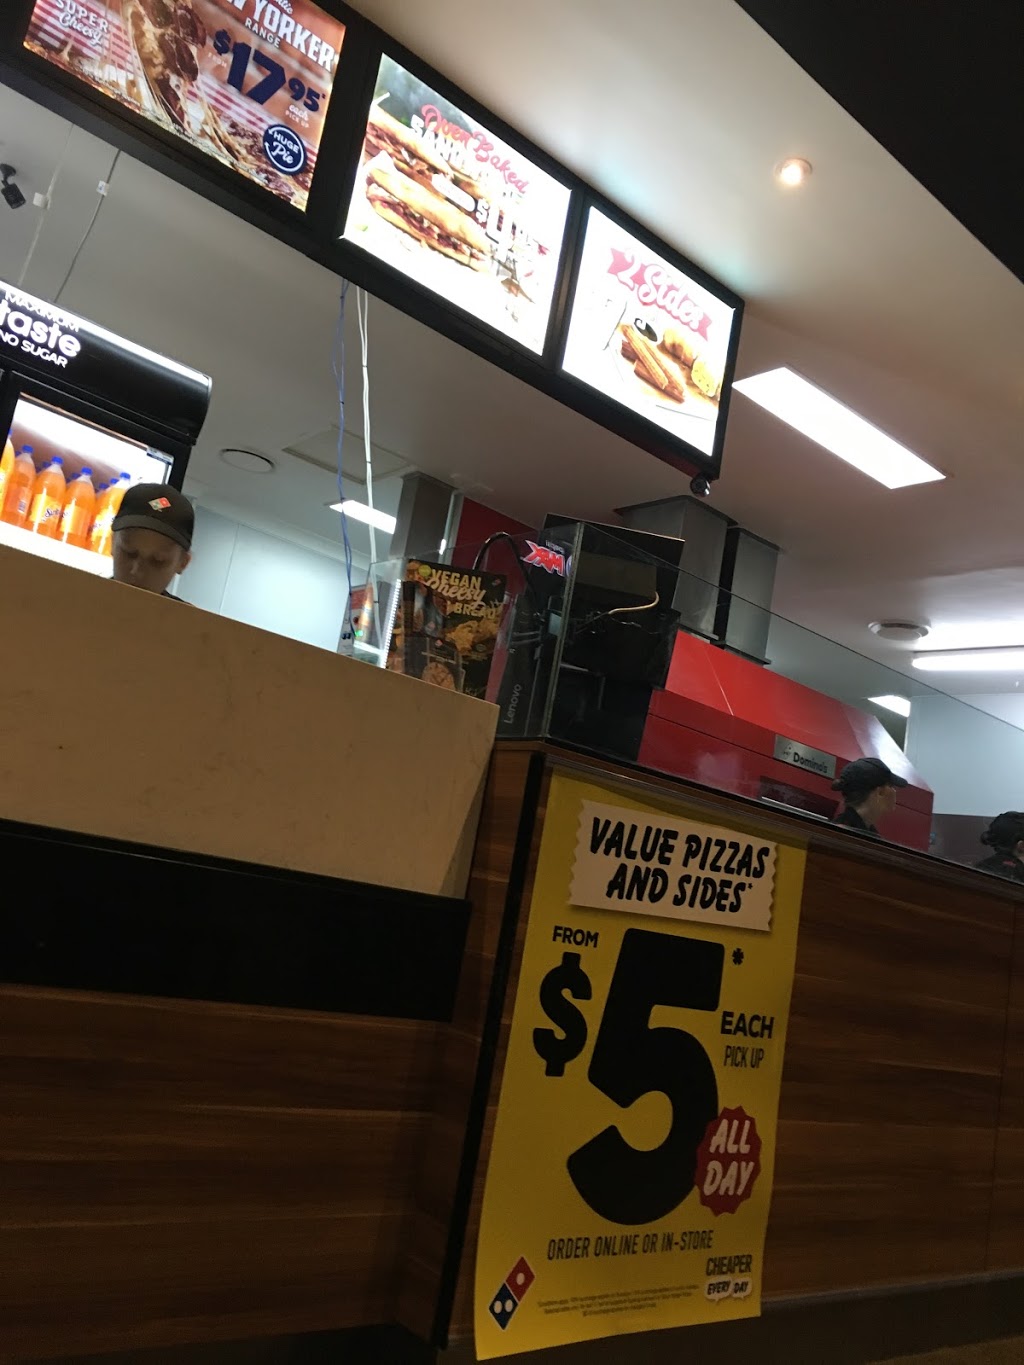 Dominos Pizza Rutherford | meal takeaway | Shop/2 W Mall, Rutherford NSW 2320, Australia | 0240158320 OR +61 2 4015 8320